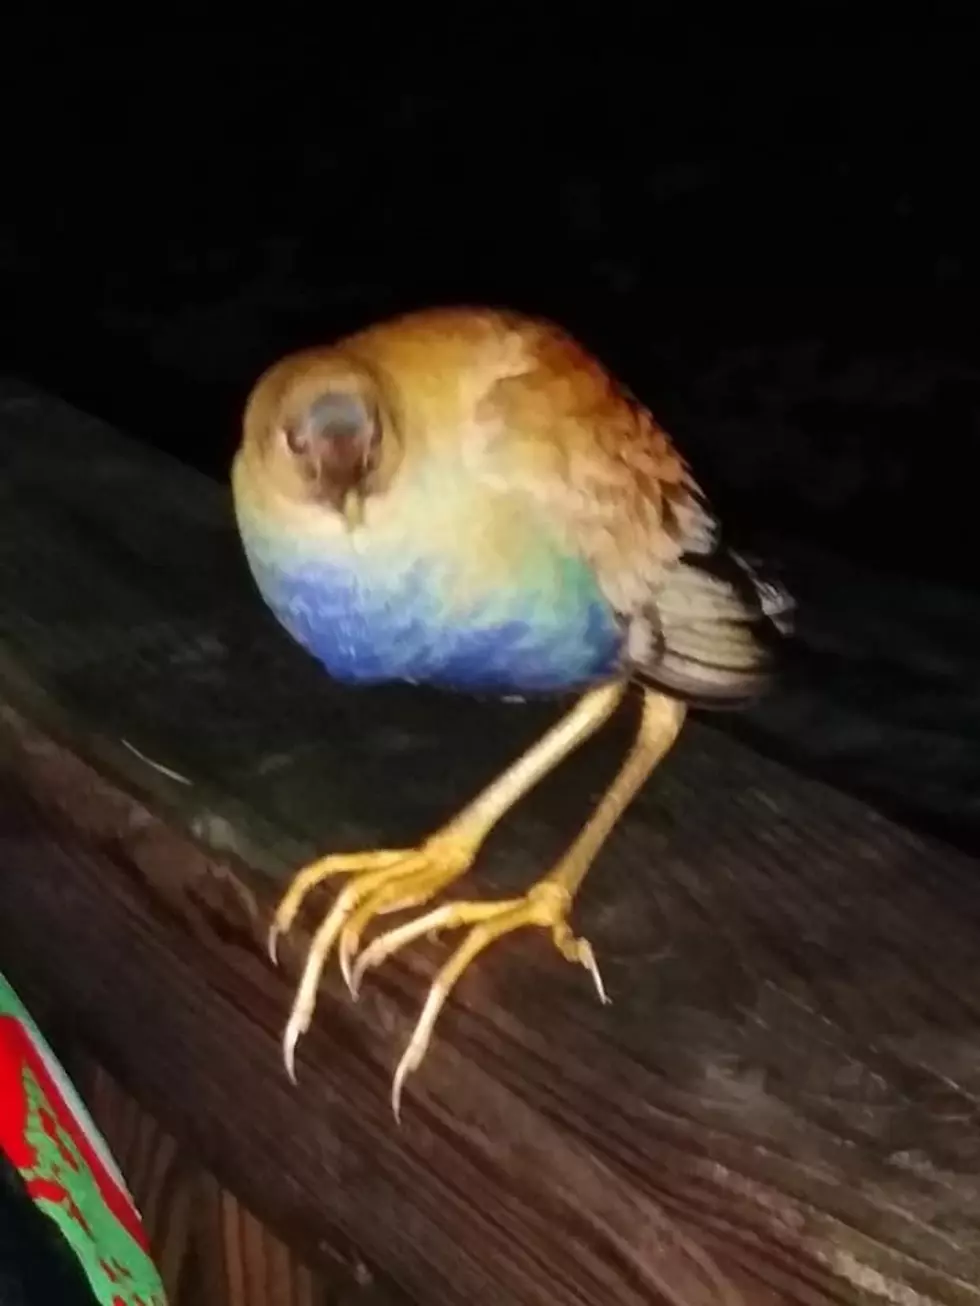 There Are Some Strange Birds Popping Up in Maine, and They Need Your Help